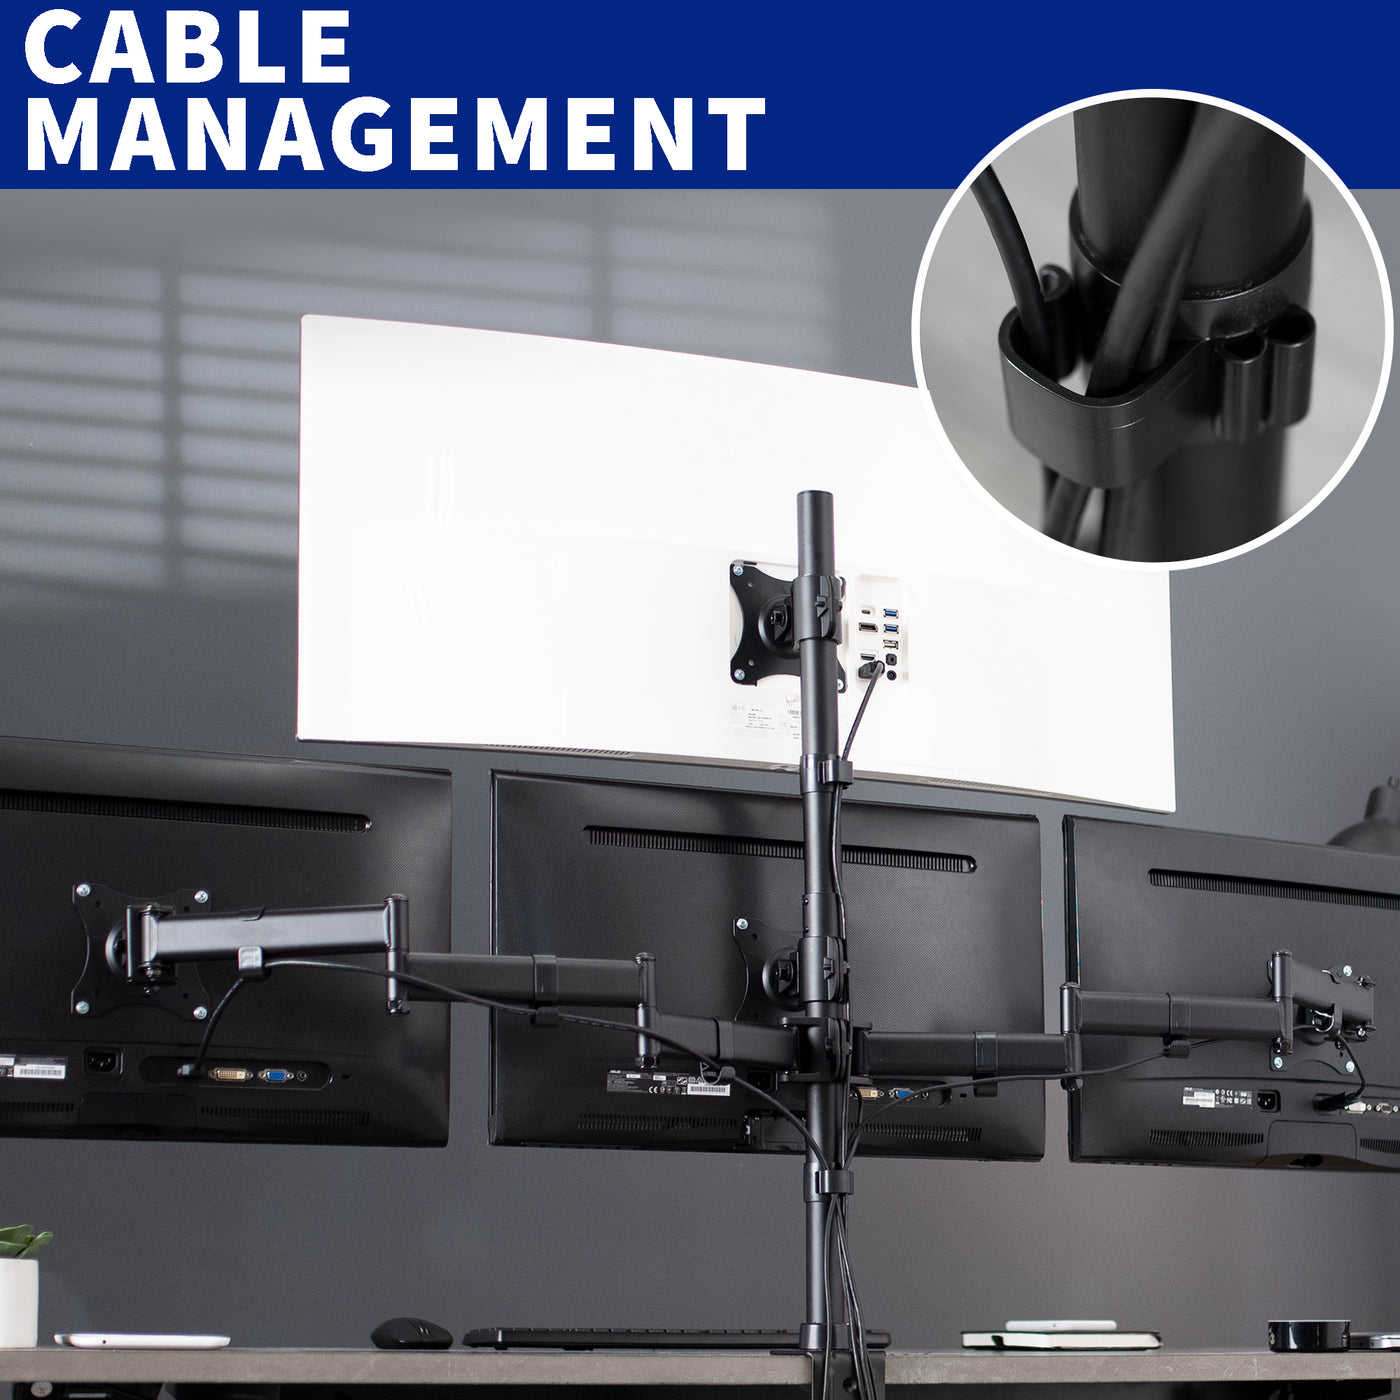 Sturdy height adjustable quad monitor desk stand with cable management.